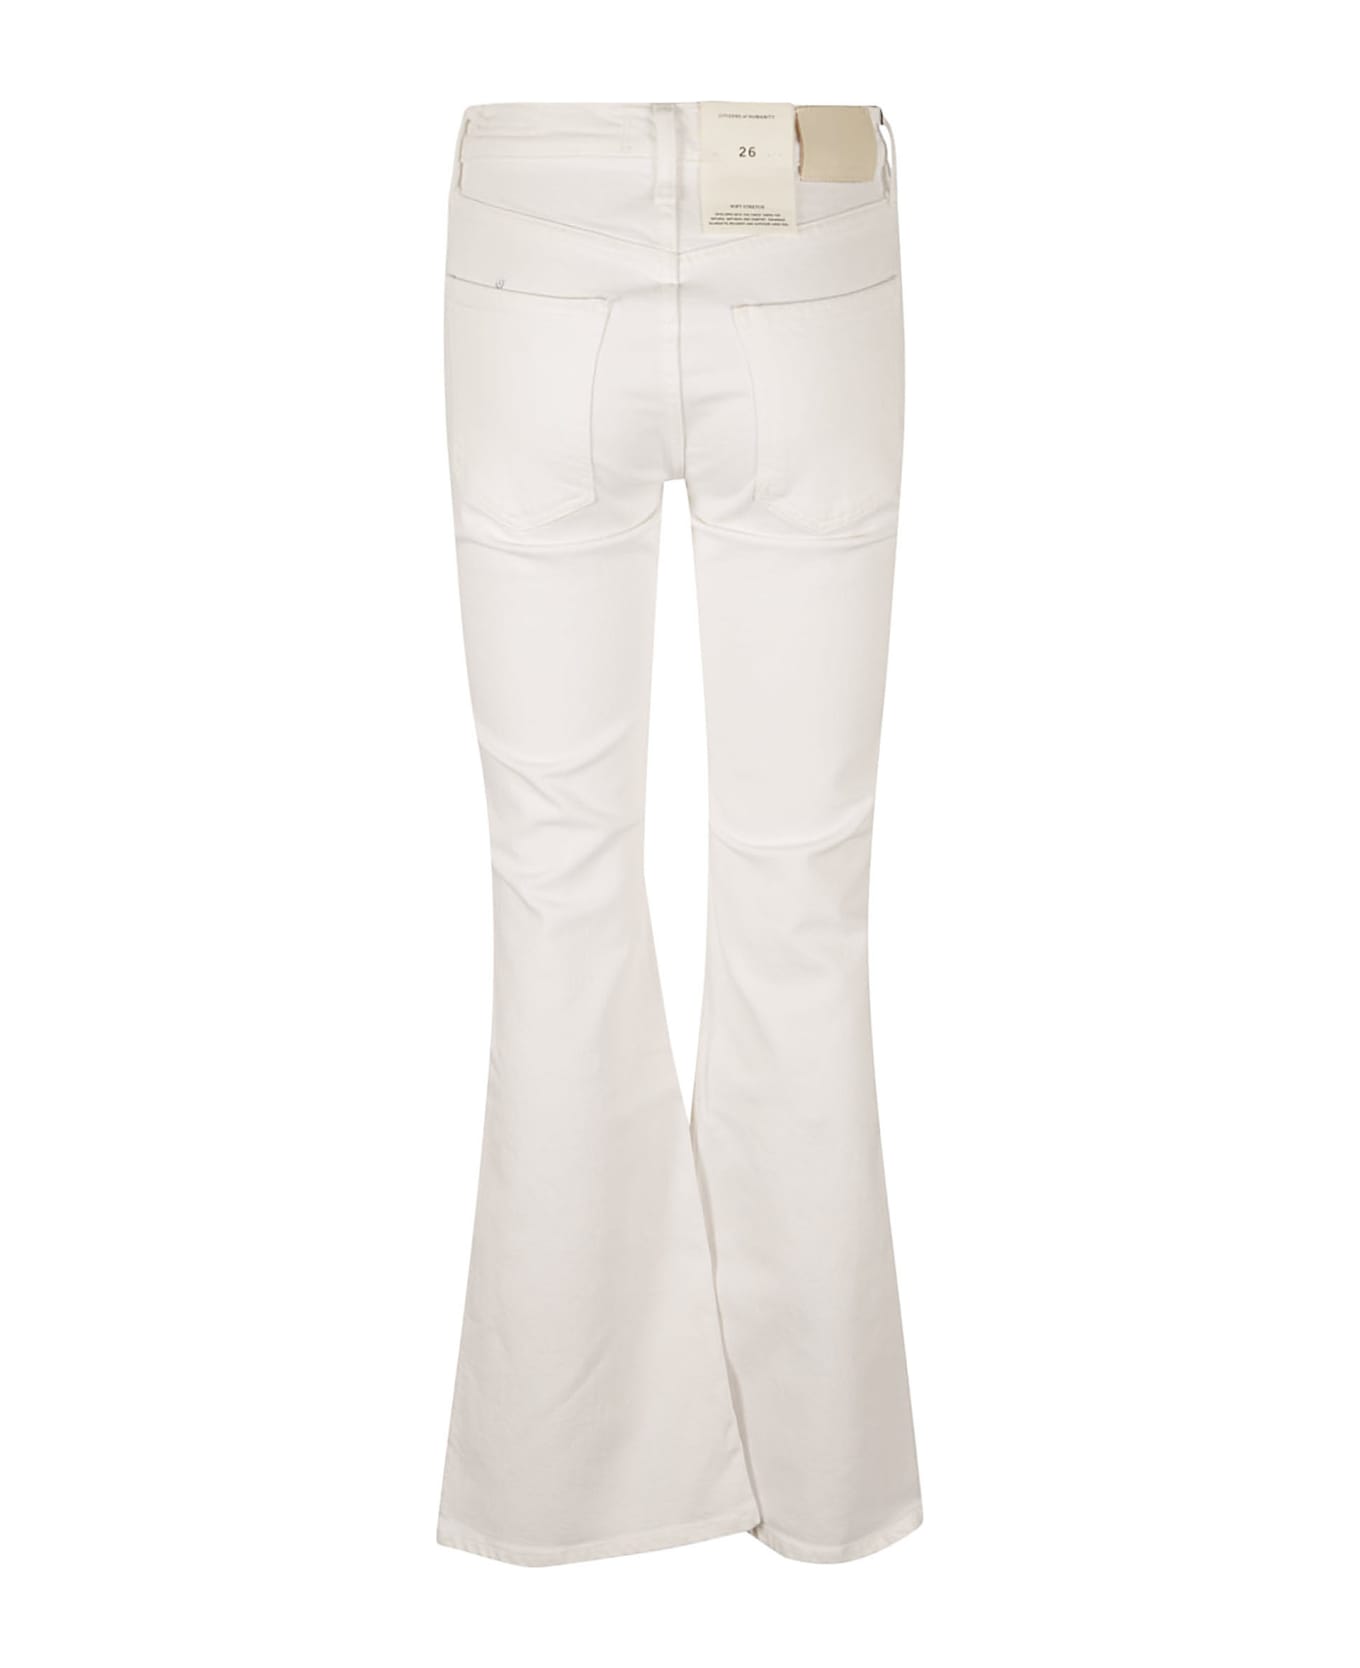 Citizens of Humanity 5 Pockets Flare Plain Jeans - Wild Flower